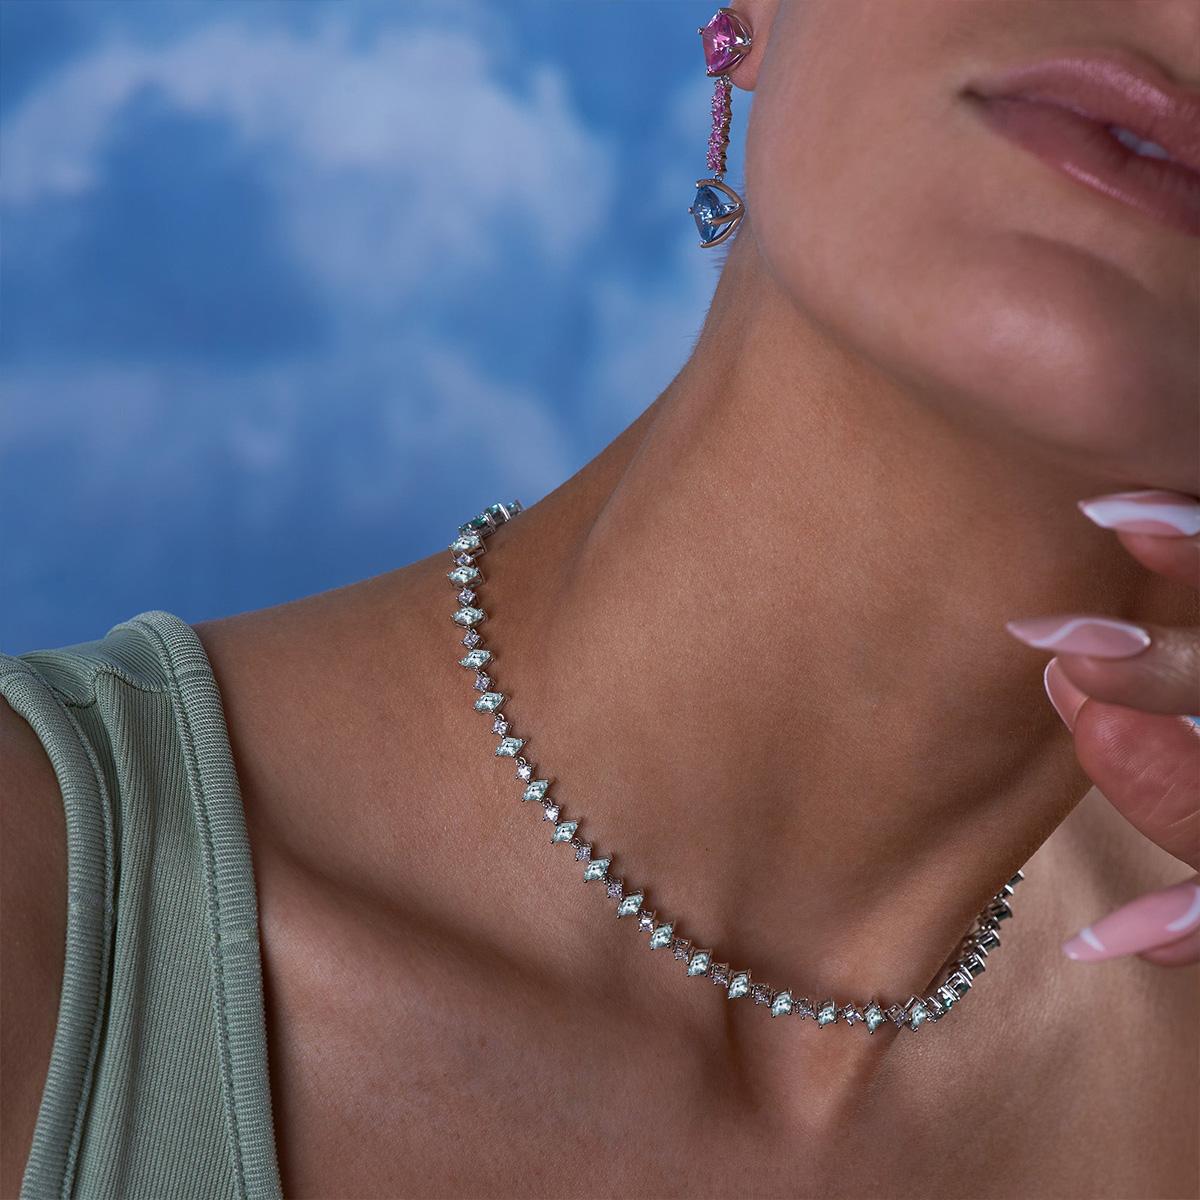 We are obsessed with the lozenge cut, enough to make a necklace that resembles the famous harlequin print. Featuring an alternating row of aquamarine lozenge sapphires and princess cut white sapphires, this necklace is extendable, so you can wear it